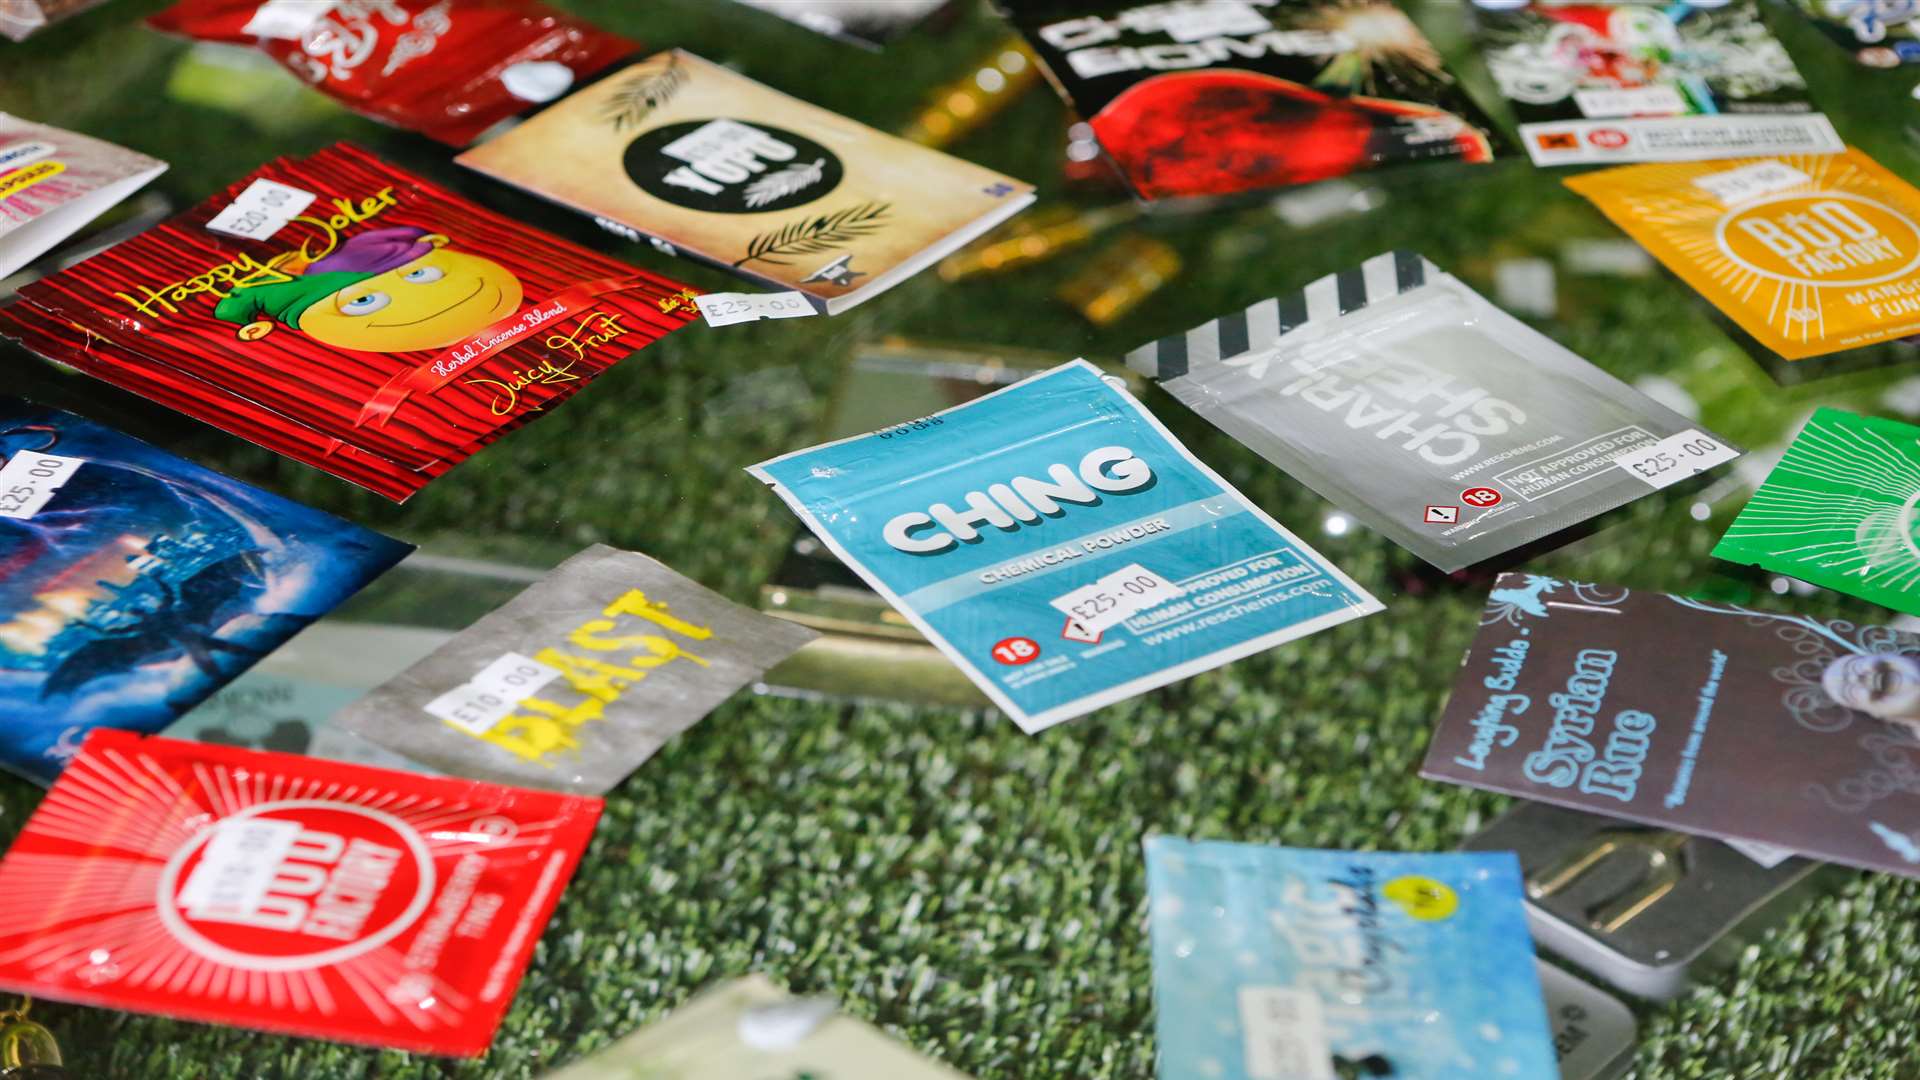 A selection of 'legal highs' seized last year at a shop in Maidstone